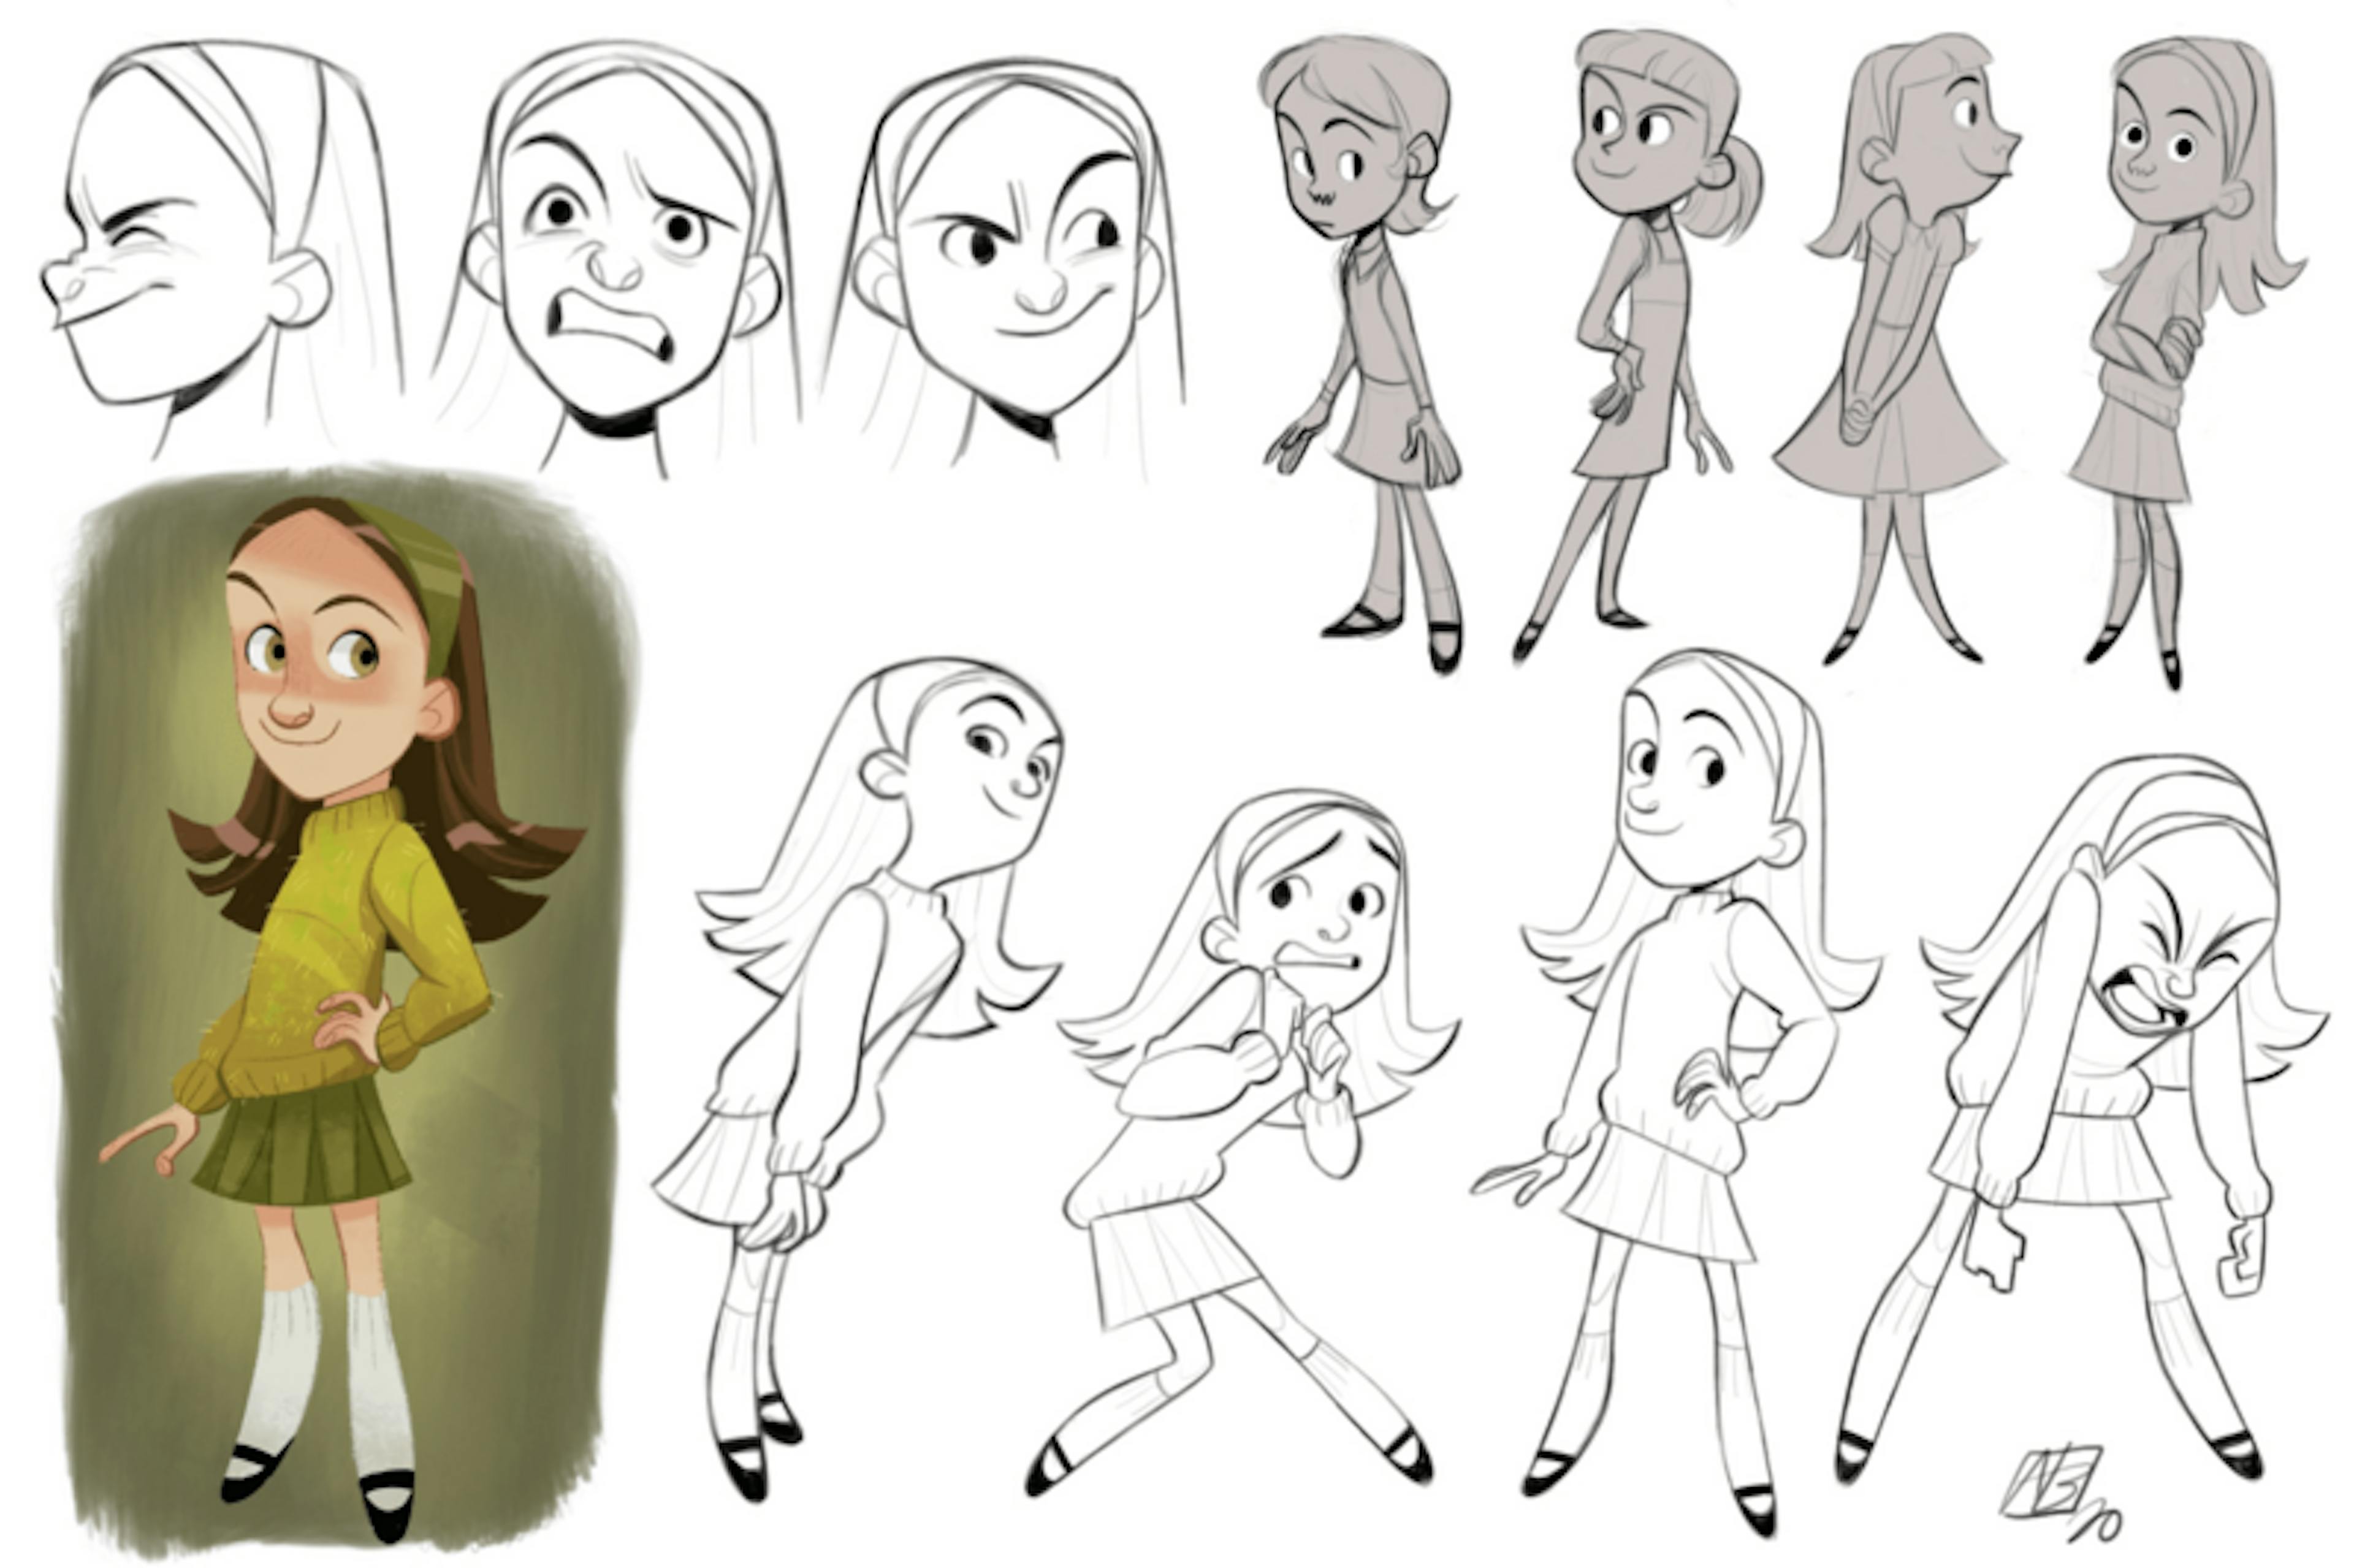 A character study of a mean schoolgirl